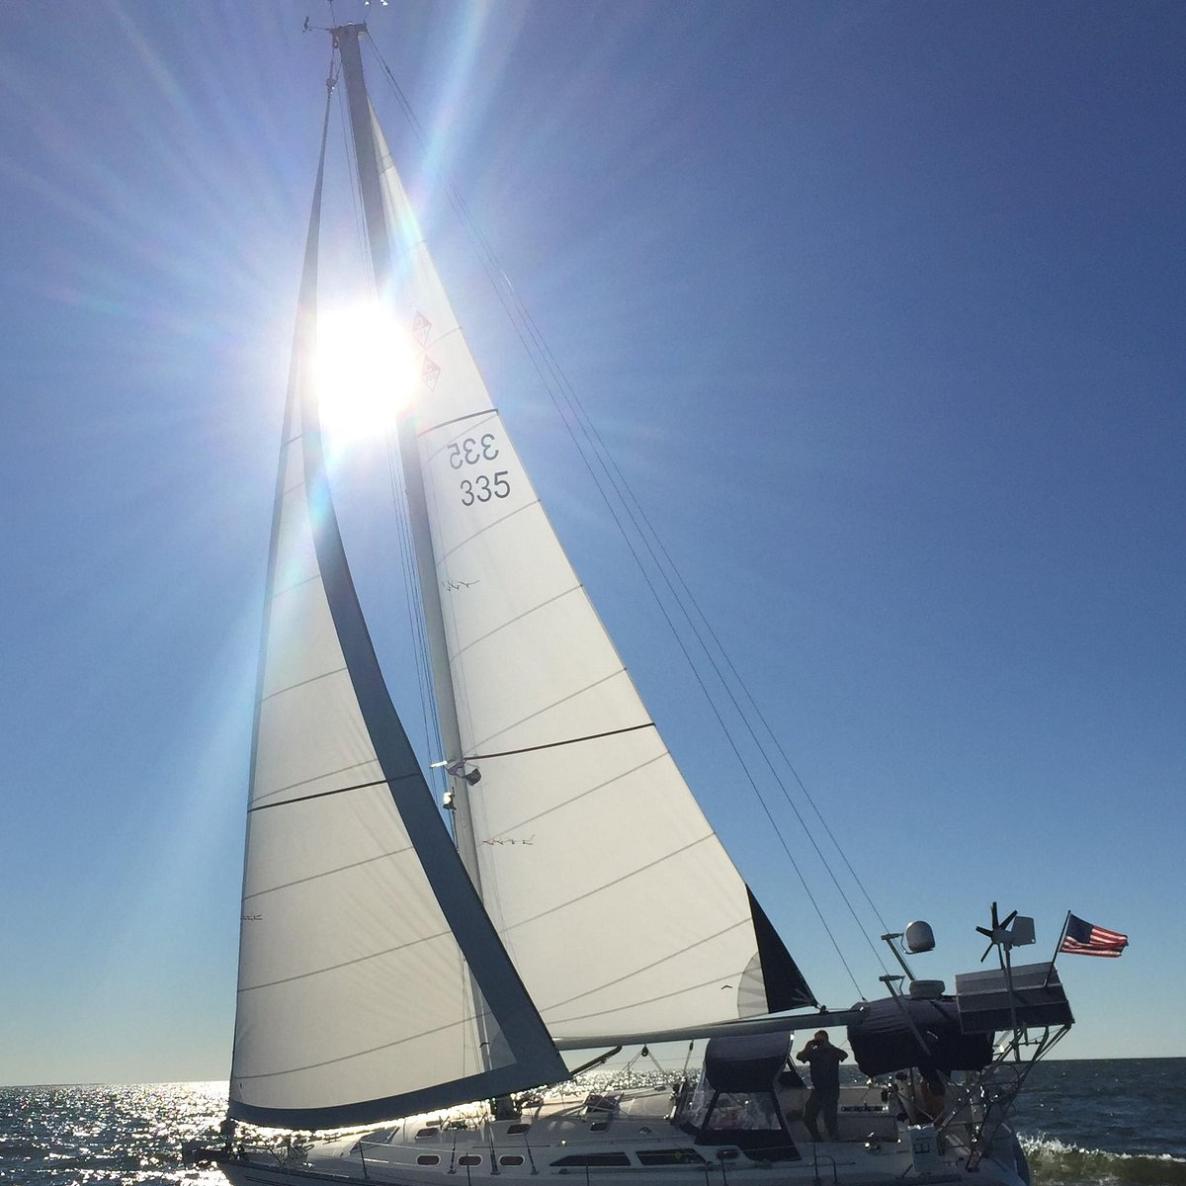 What Are the Benefits of Taking a Sailing Trip?